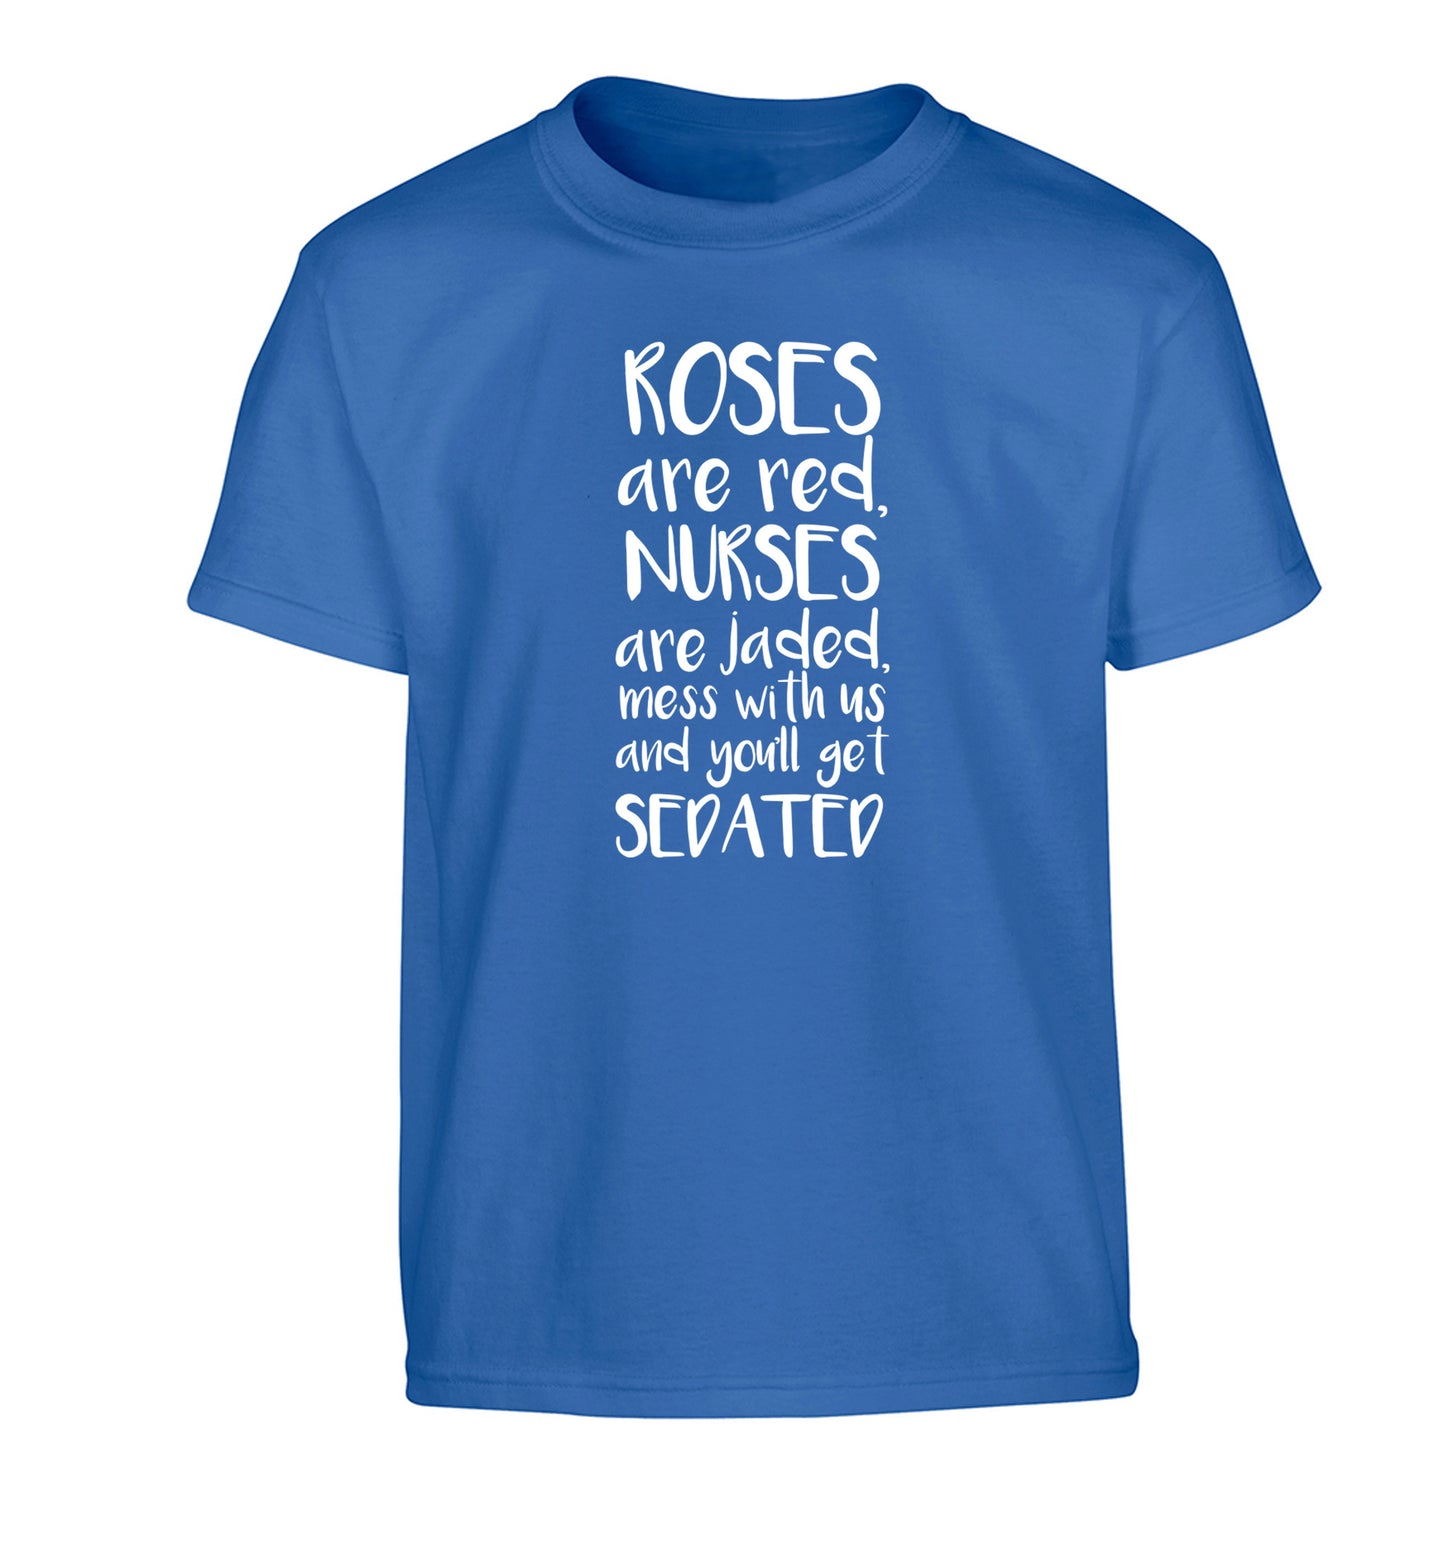 Roses are red, nurses are jaded, mess with us and you'll get sedated Children's blue Tshirt 12-14 Years